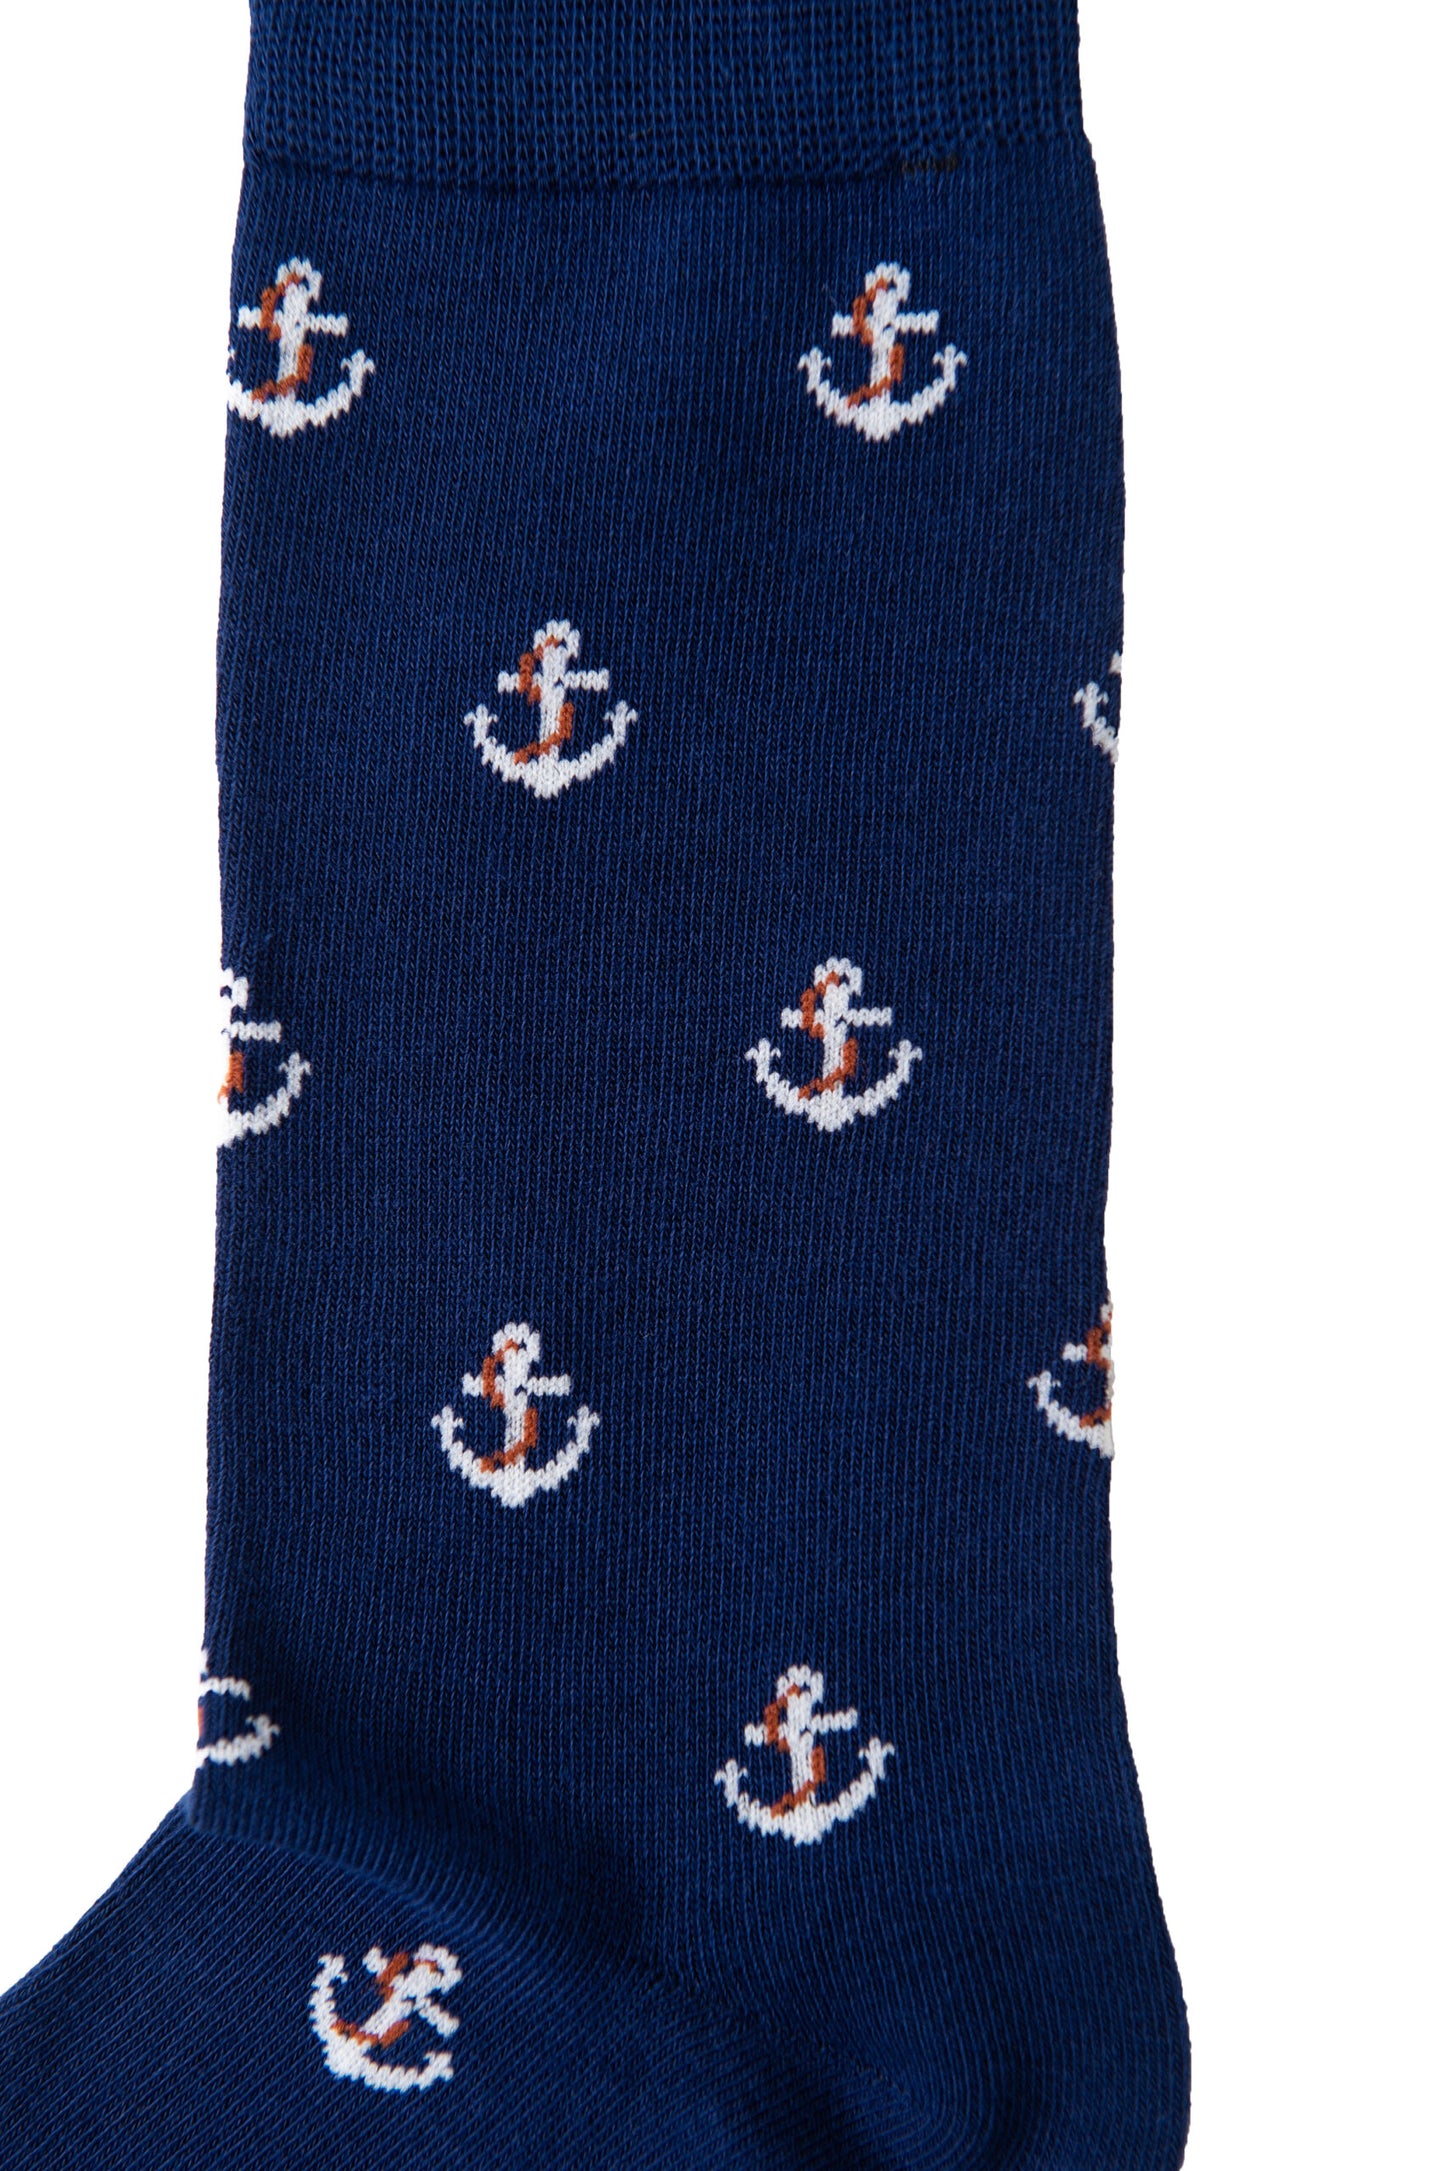 Anchor Socks: A blue sock with white anchor design.